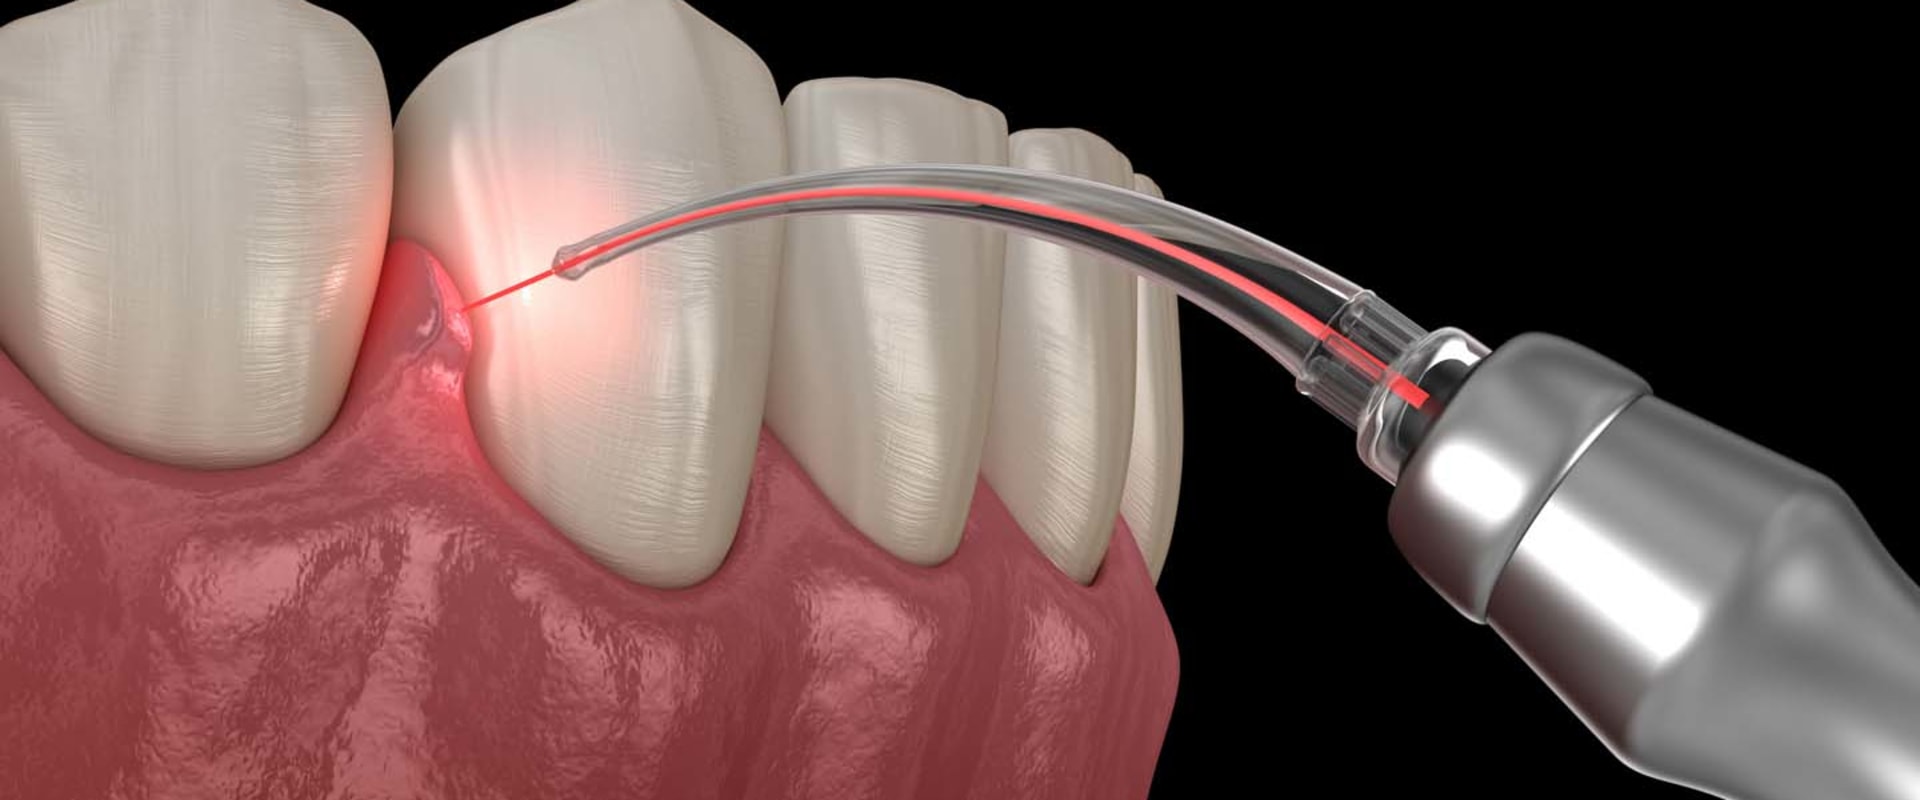 How To Get A Painless Dental Procedure With Laser Dentistry In Allen, TX